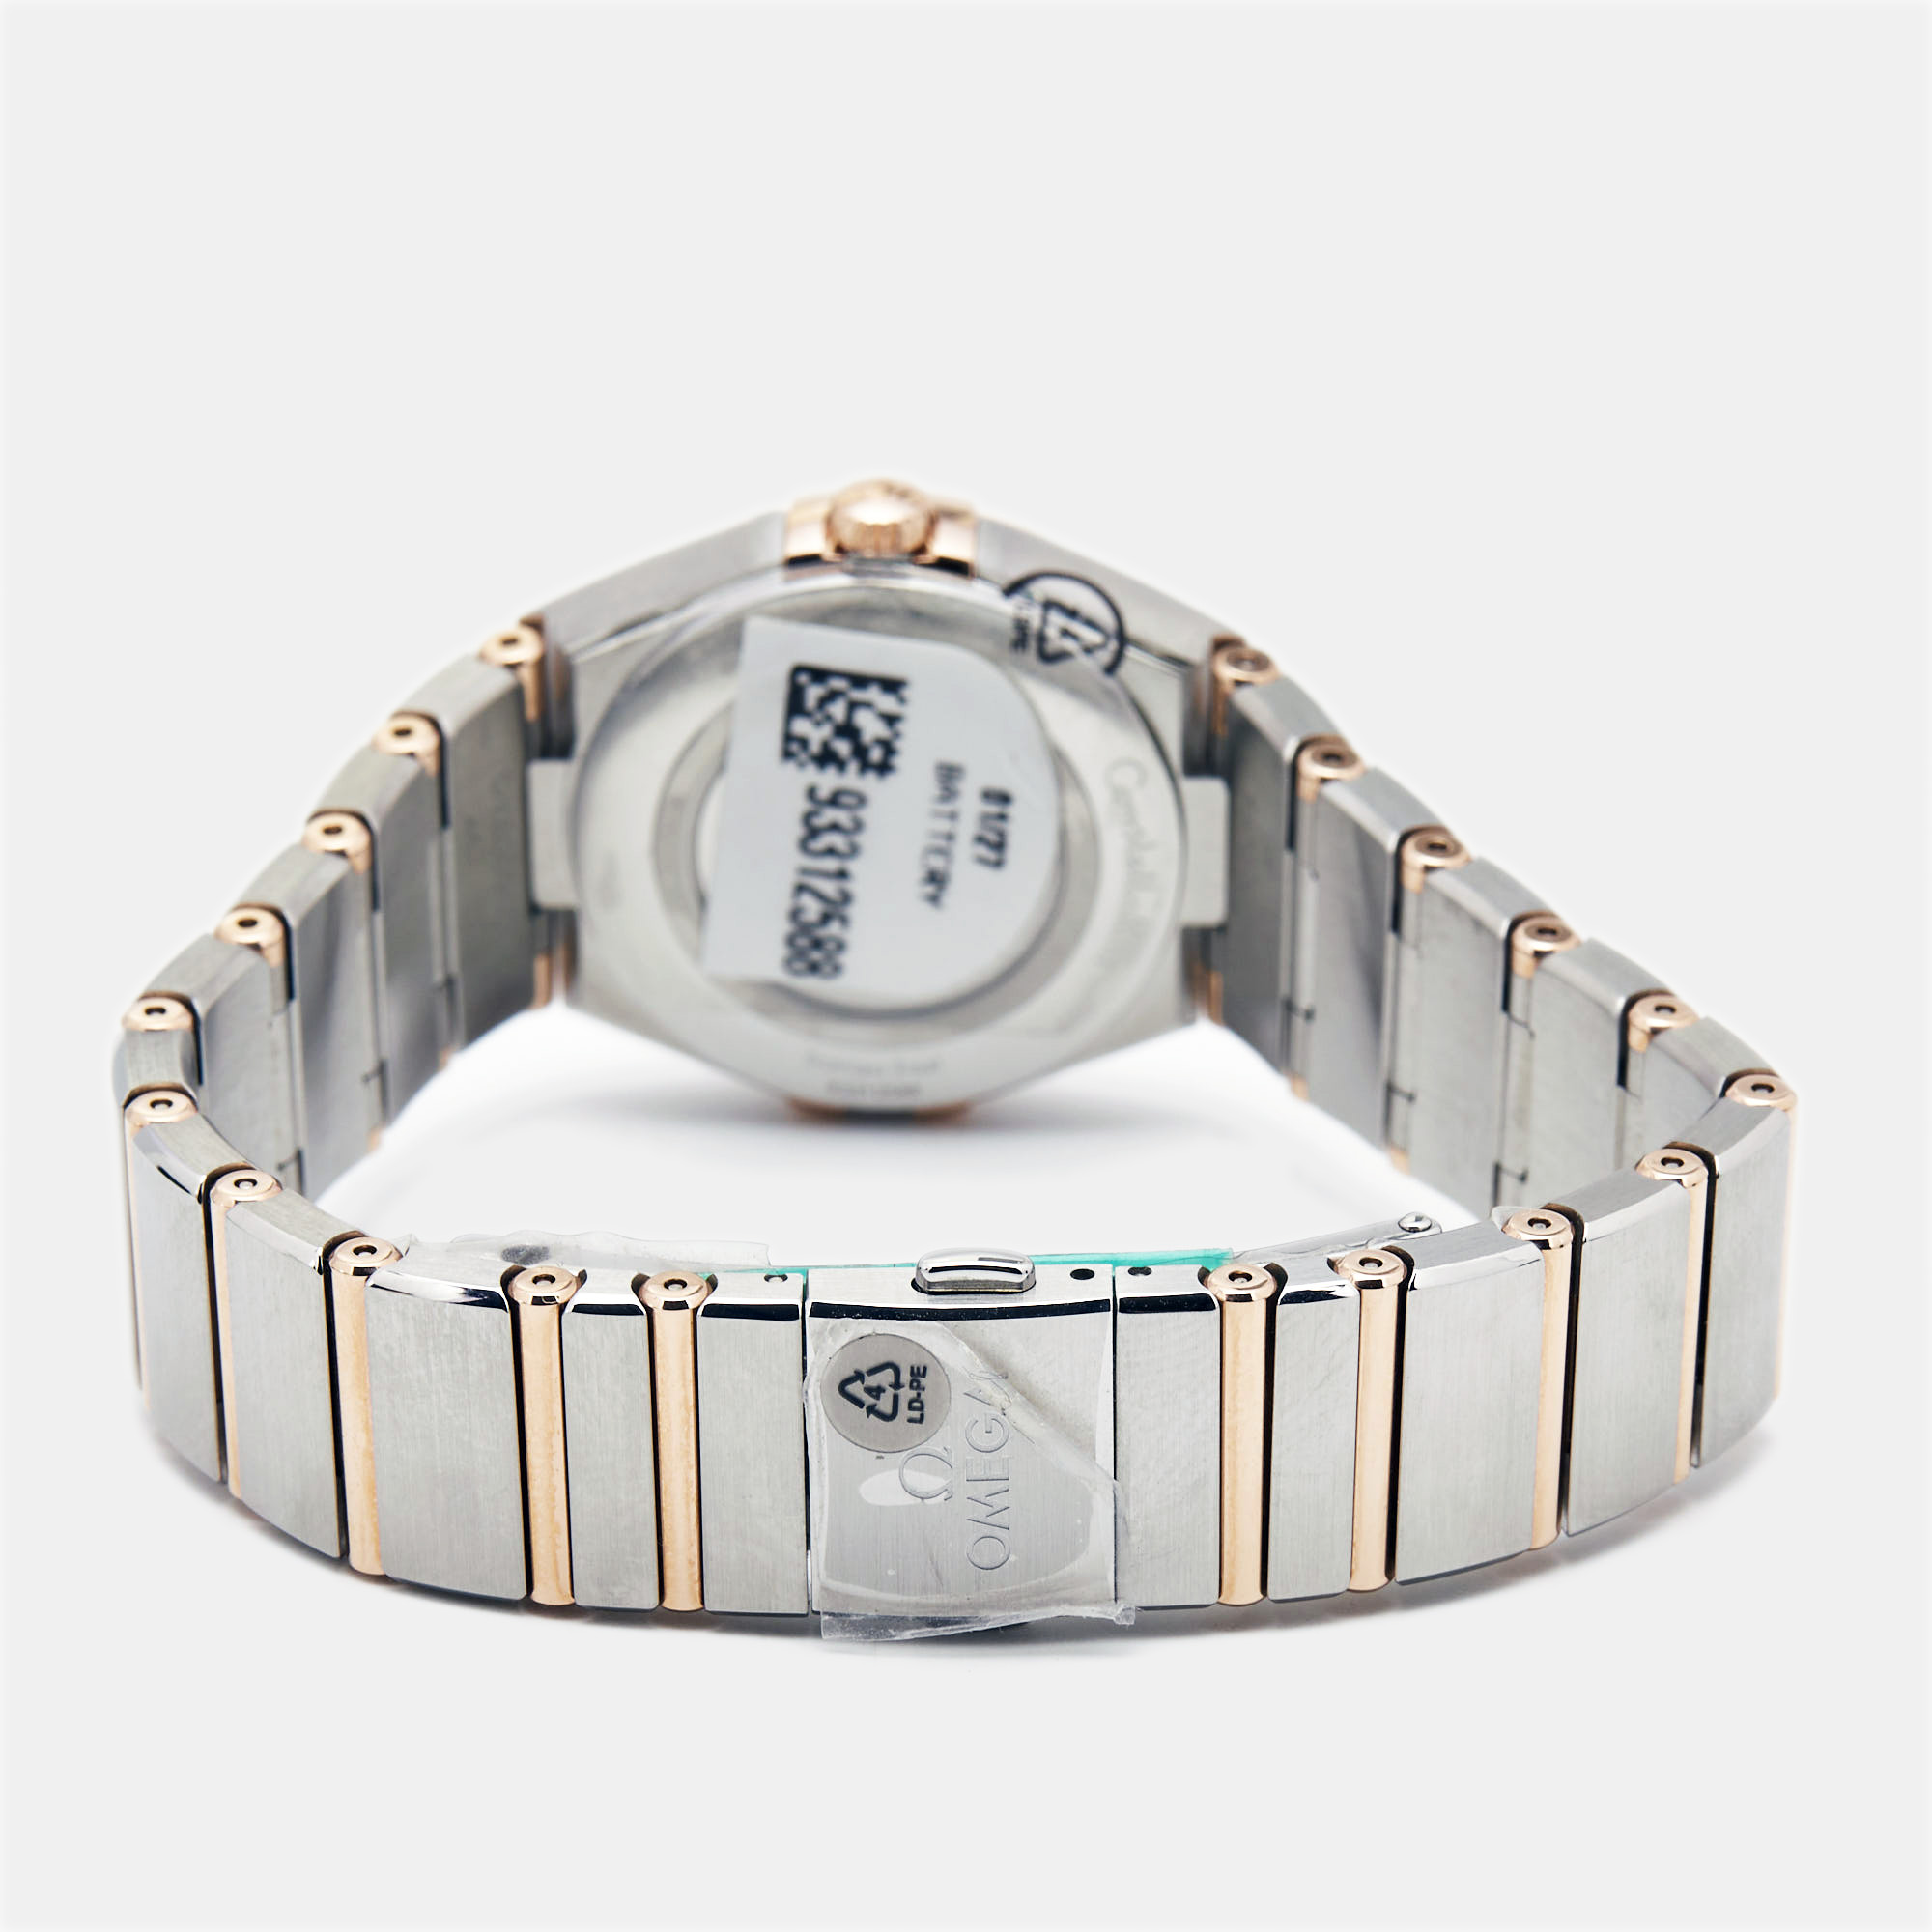 Omega Mother Of Pearl 18K Rose Gold Stainless Steel Diamond Constellation 131.20.28.60.55.001 Women's Wristwatch 28 Mm